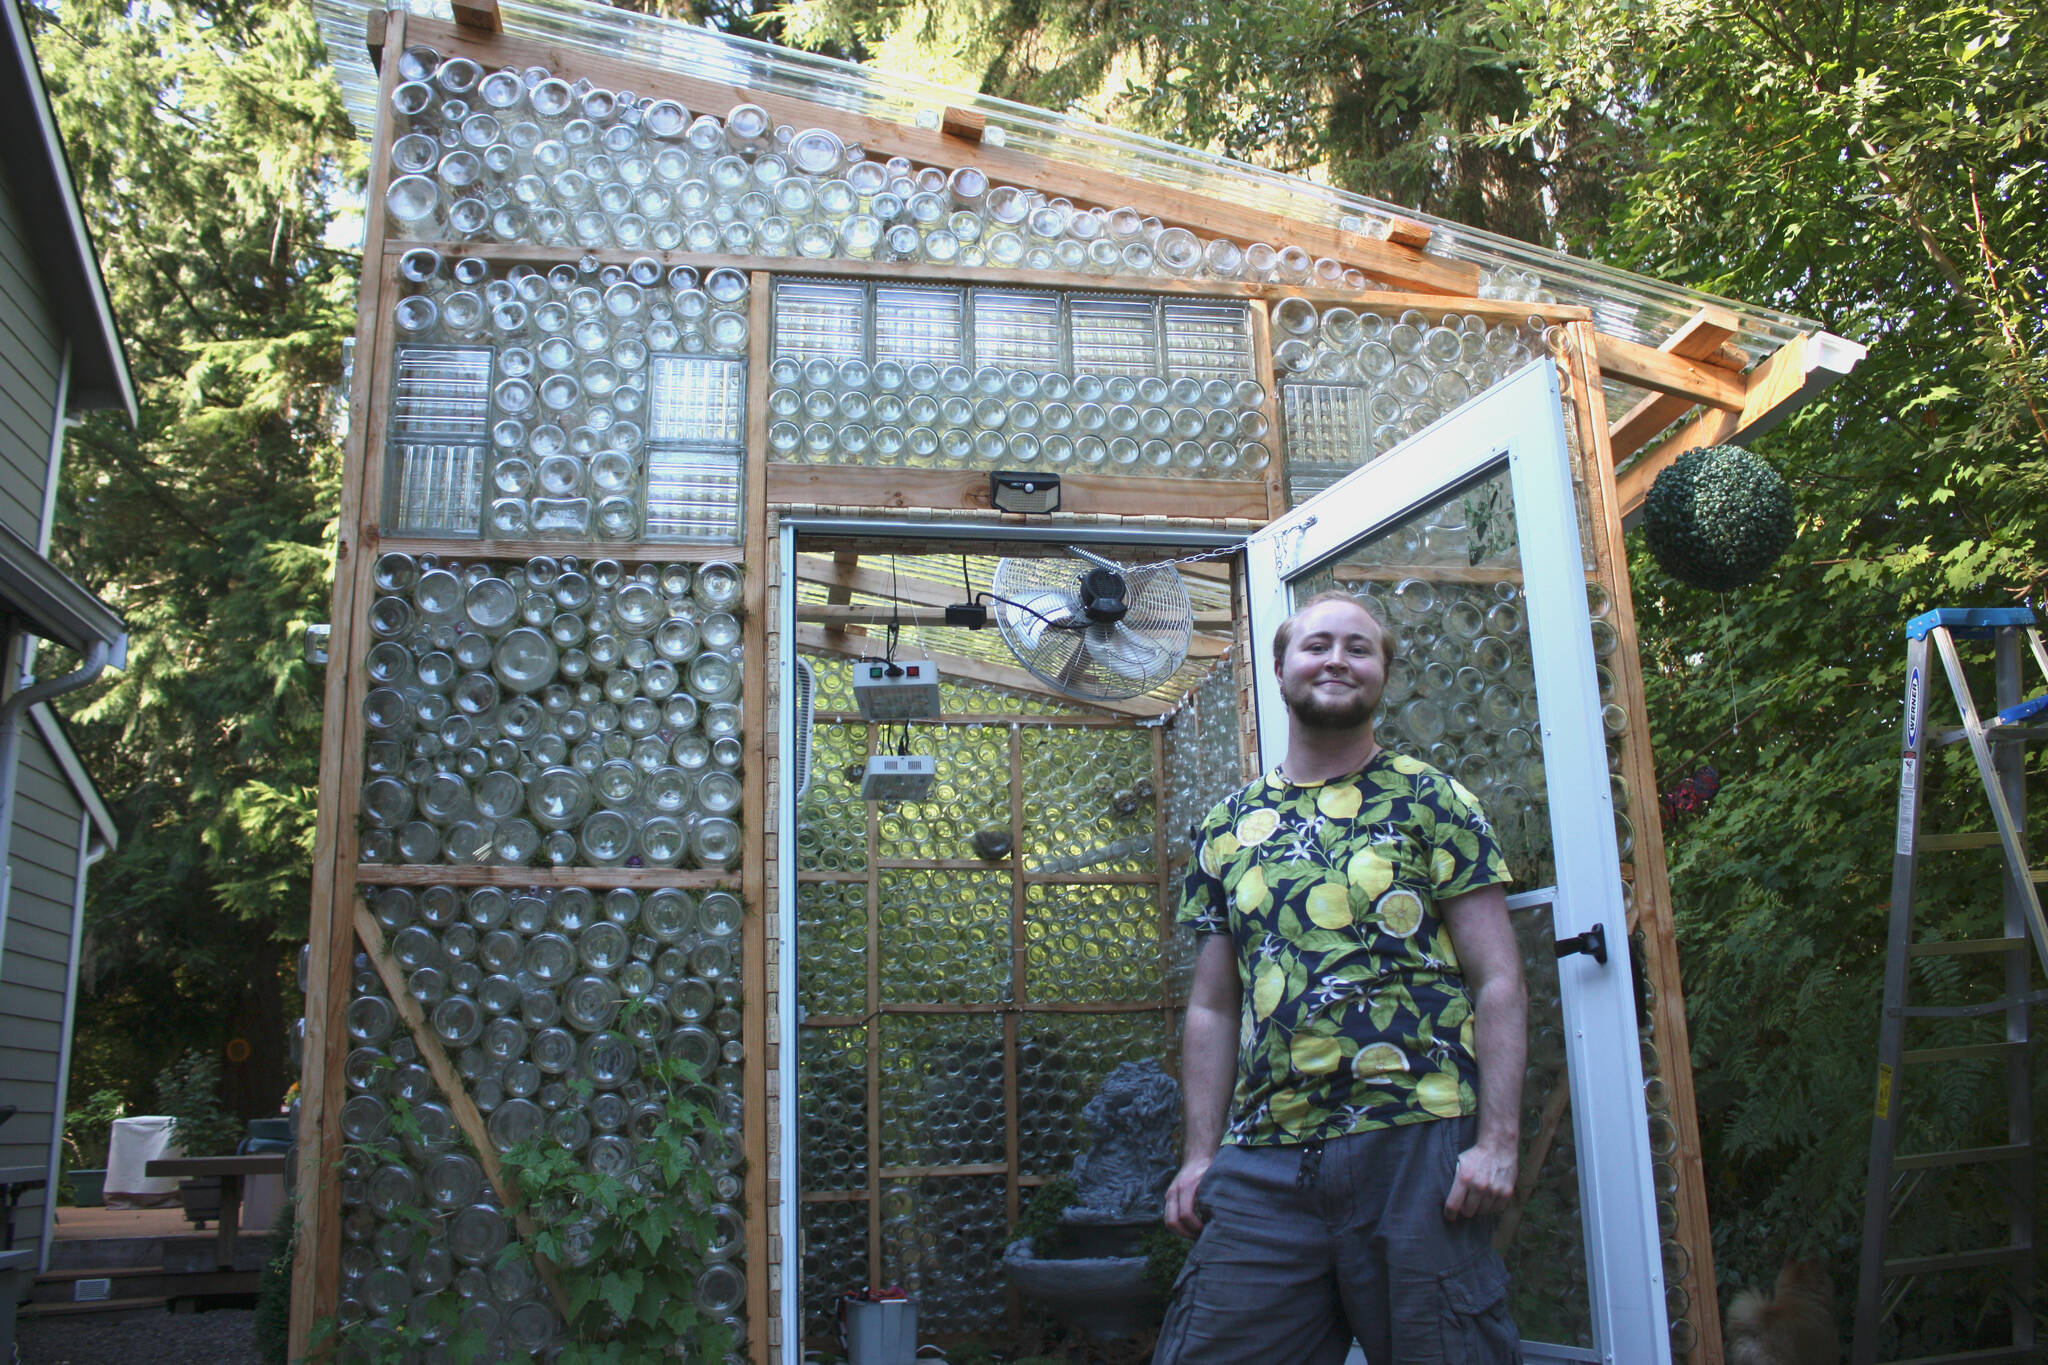 Axton Burton stands proudly in front of the greenhouse he made in his parent’s yard in Duvall, Wash. (photo by Cameron Sheppard)